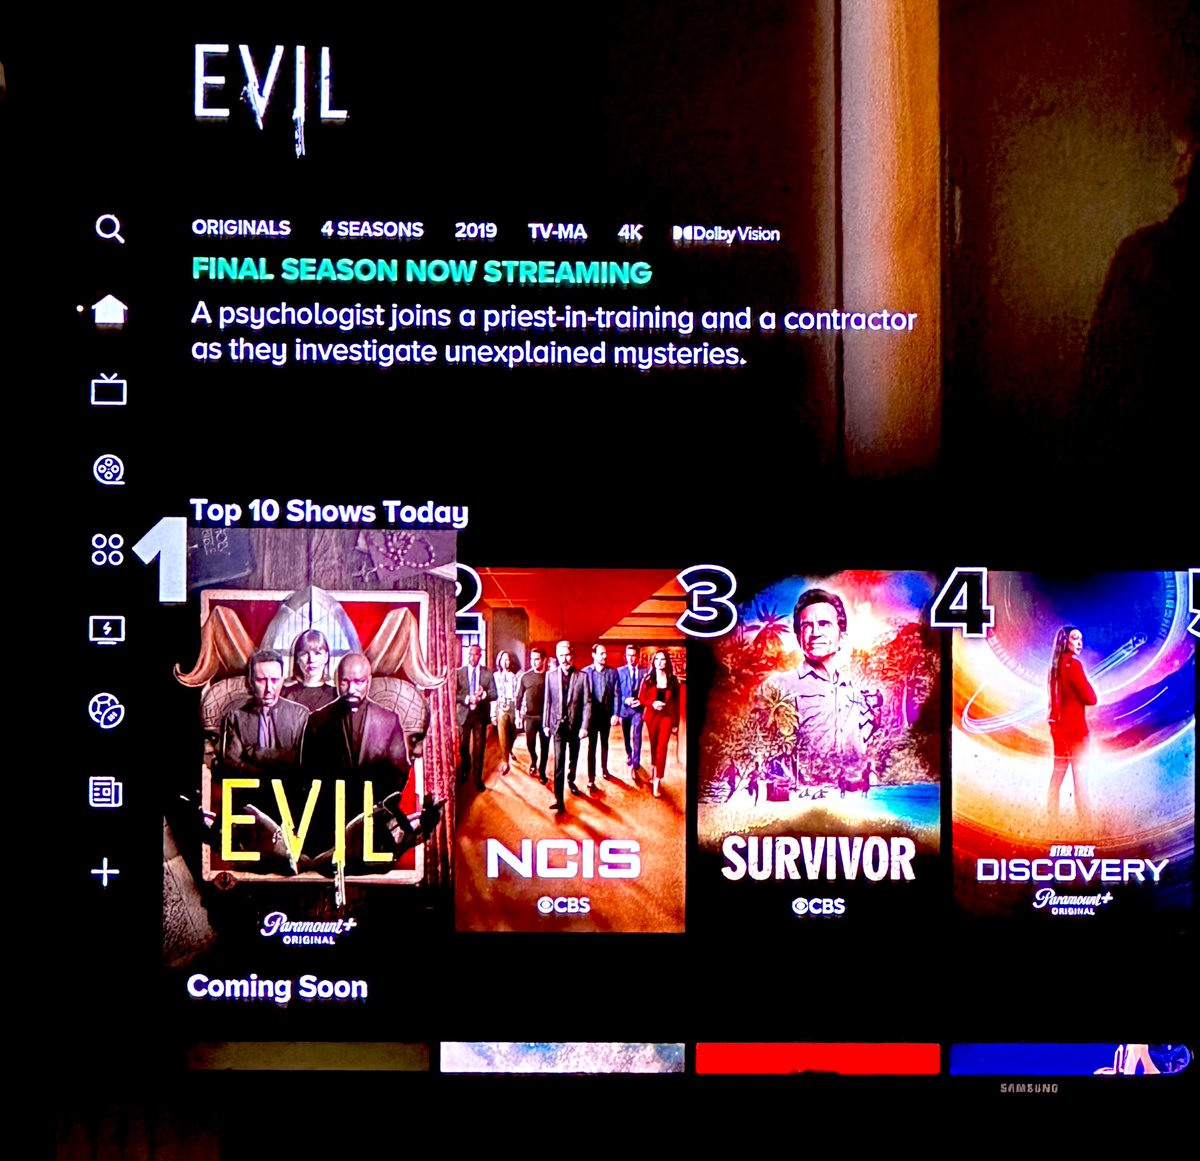 100% on rotten tomatoes, #1 show on P+, top 10 on Netflix and Kings who want to make more seasons… Hello, it’s Evil: